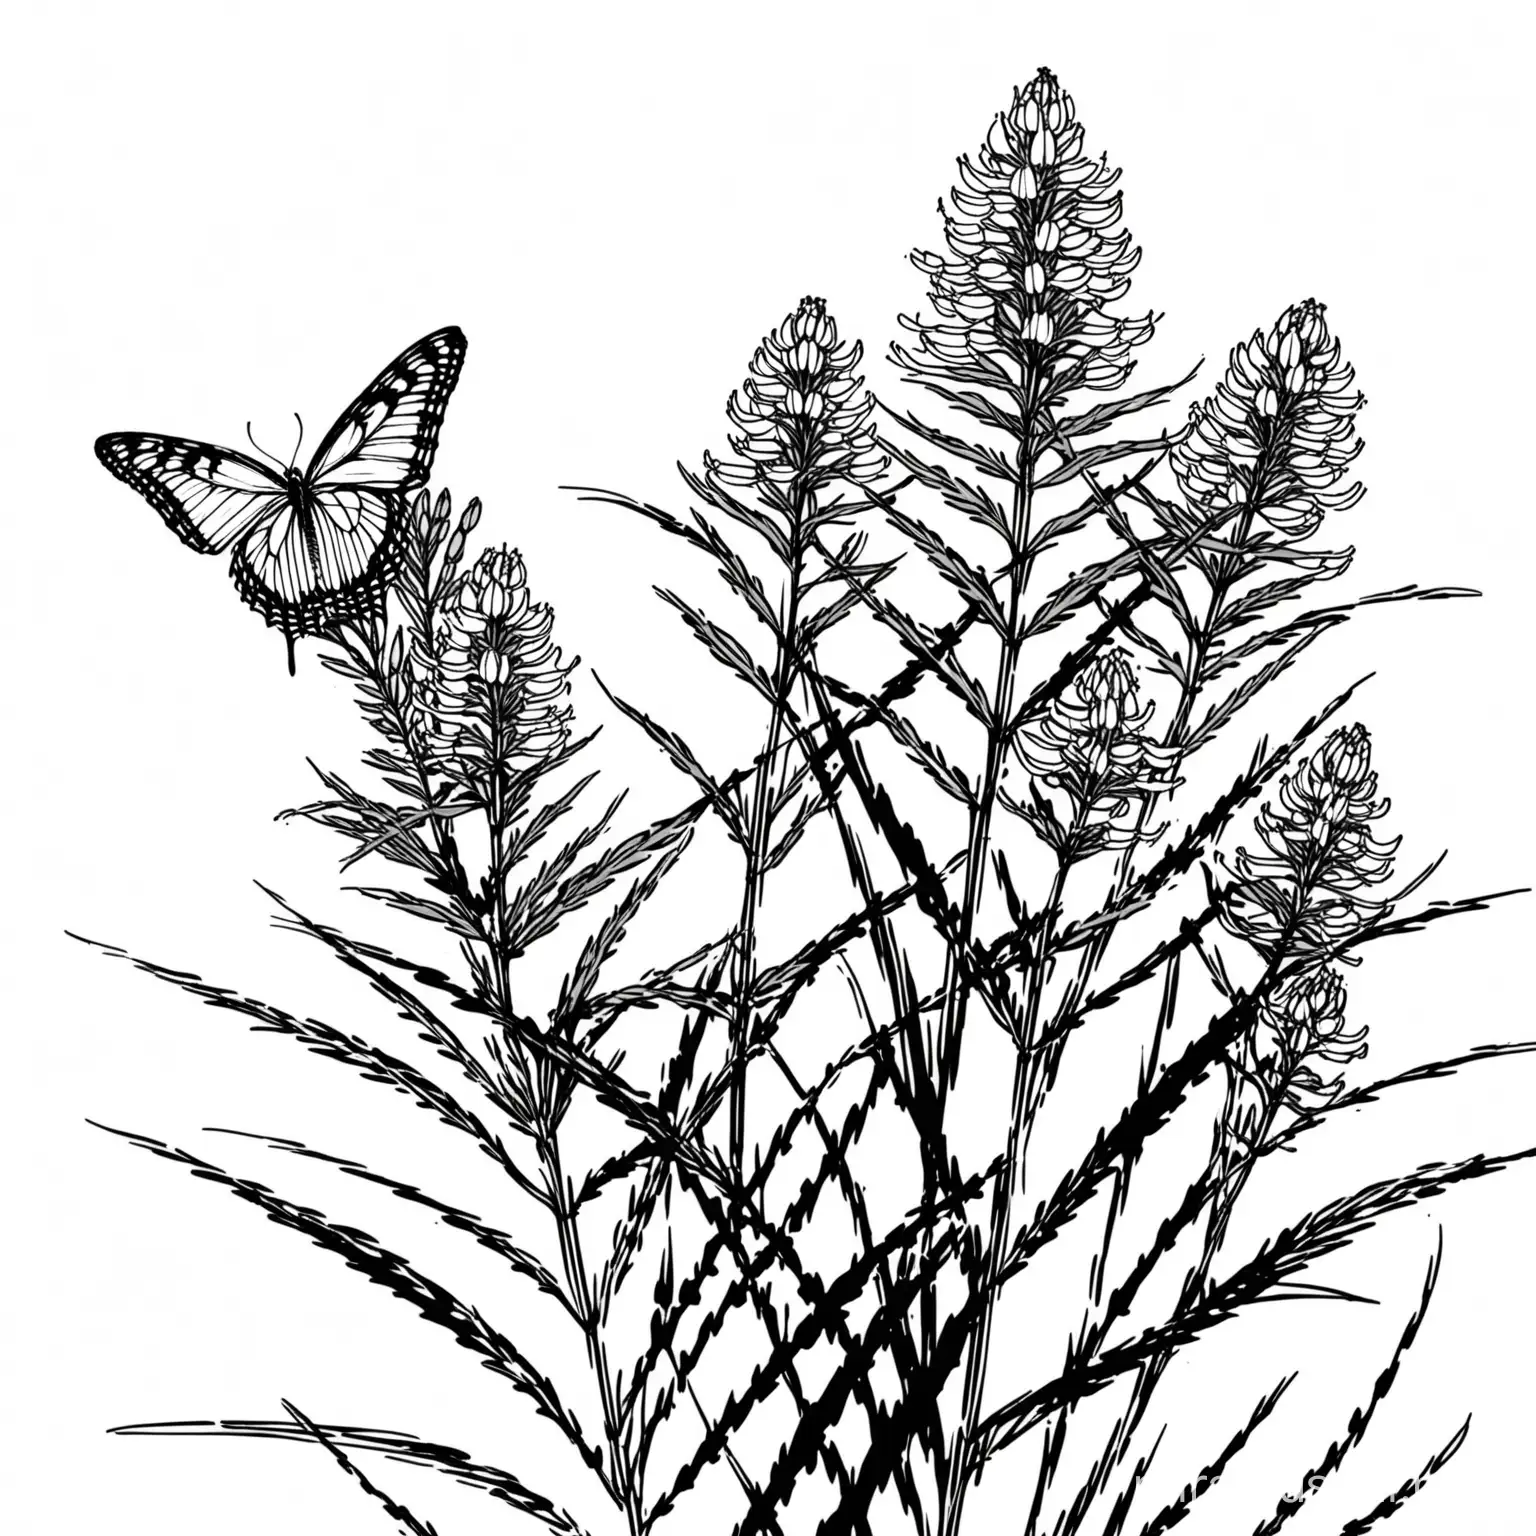 Monochrome Sketch of Butterfly Weed Plant on White Background